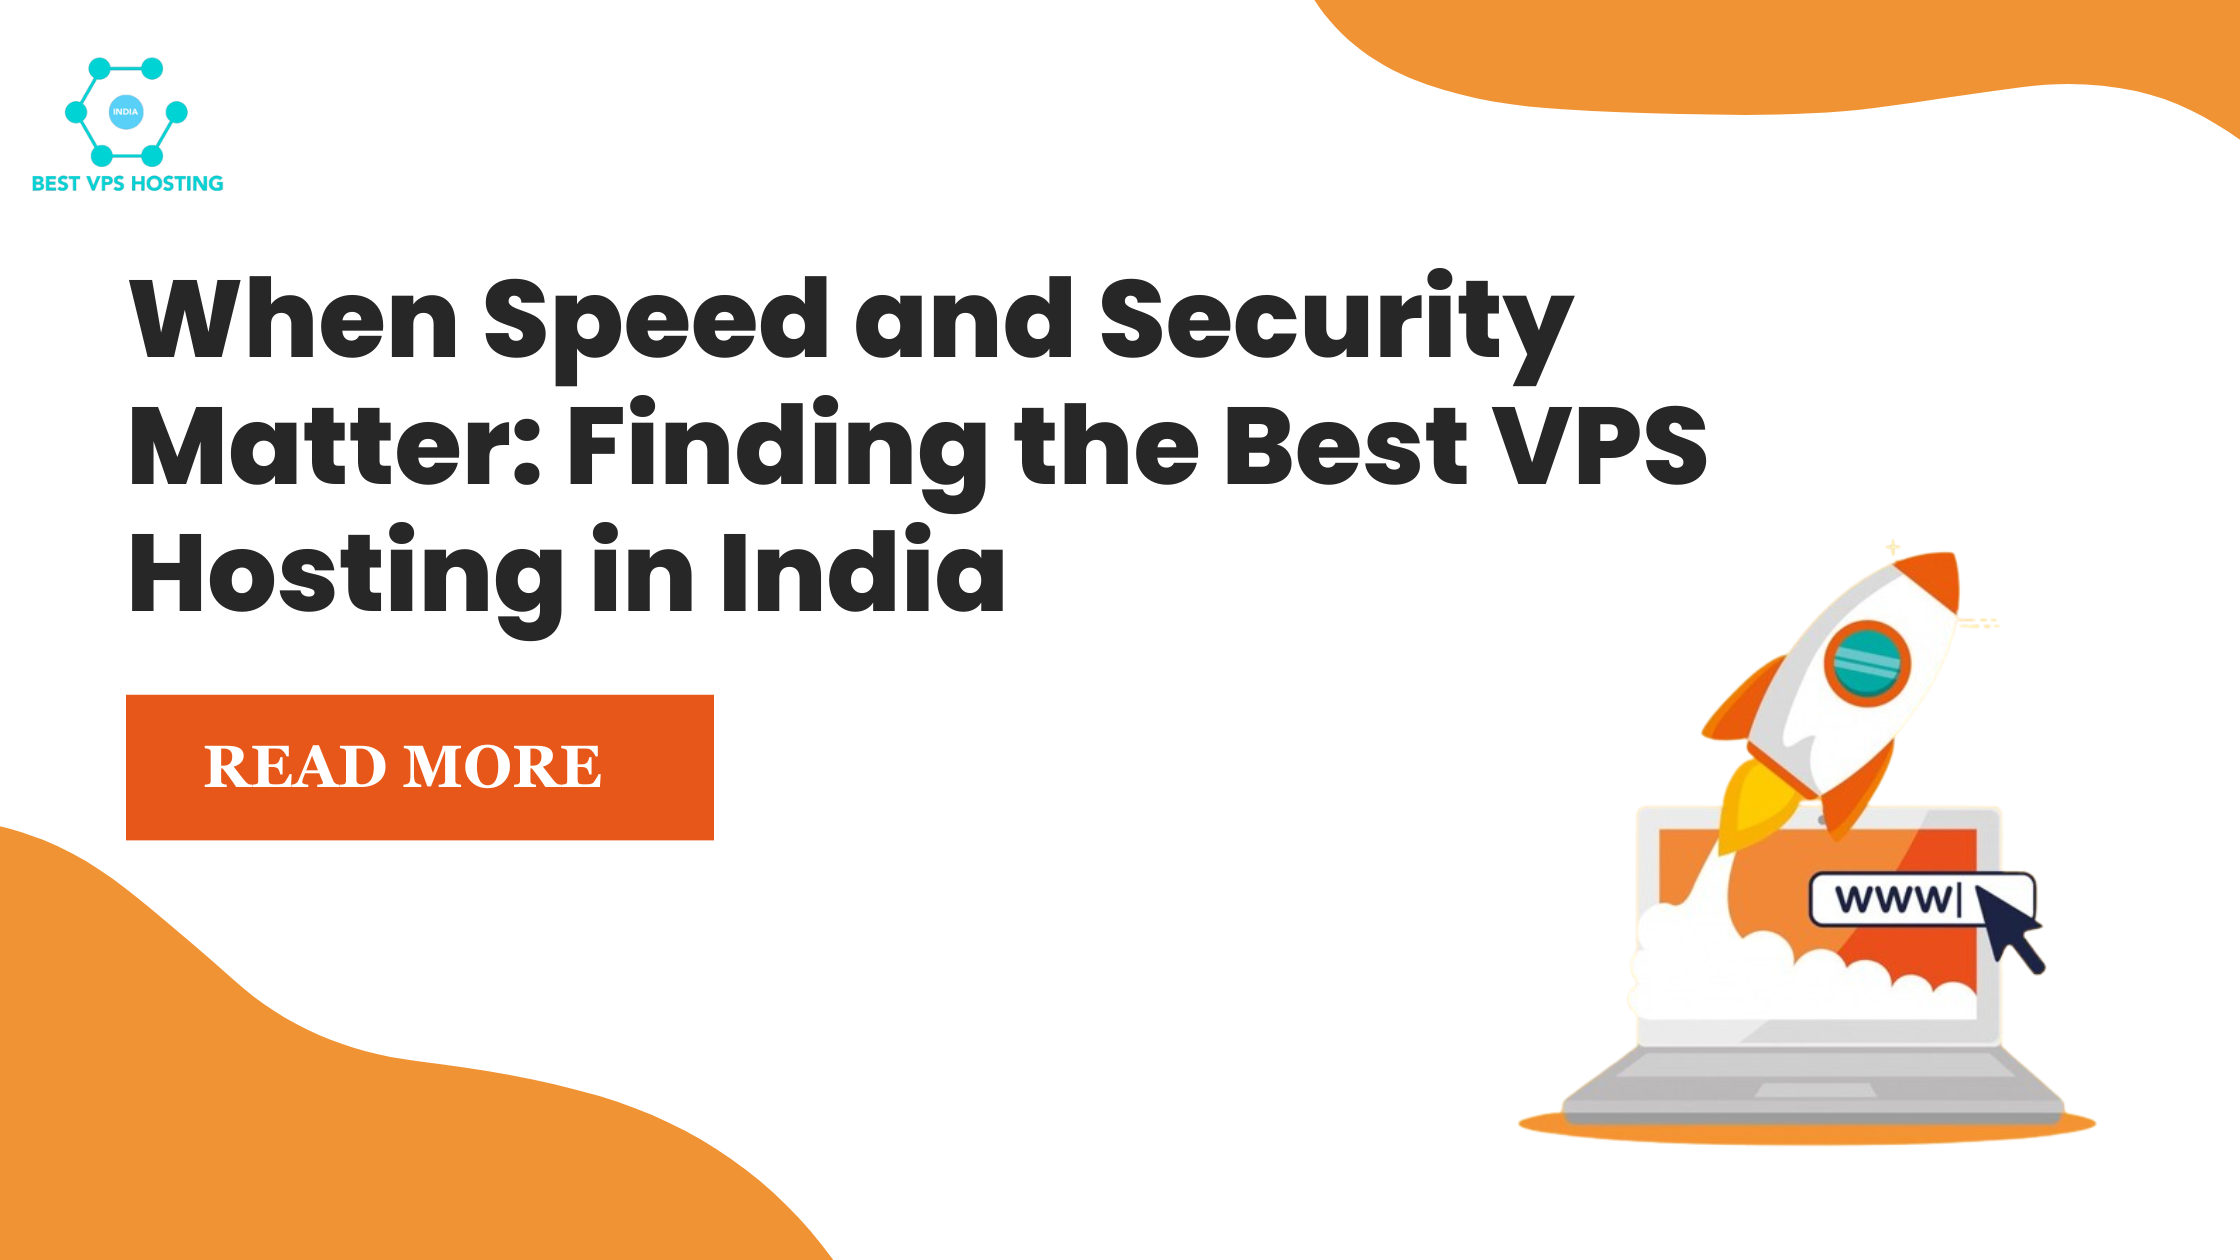 When Speed and Security Matter: Finding the Best VPS Hosting in India